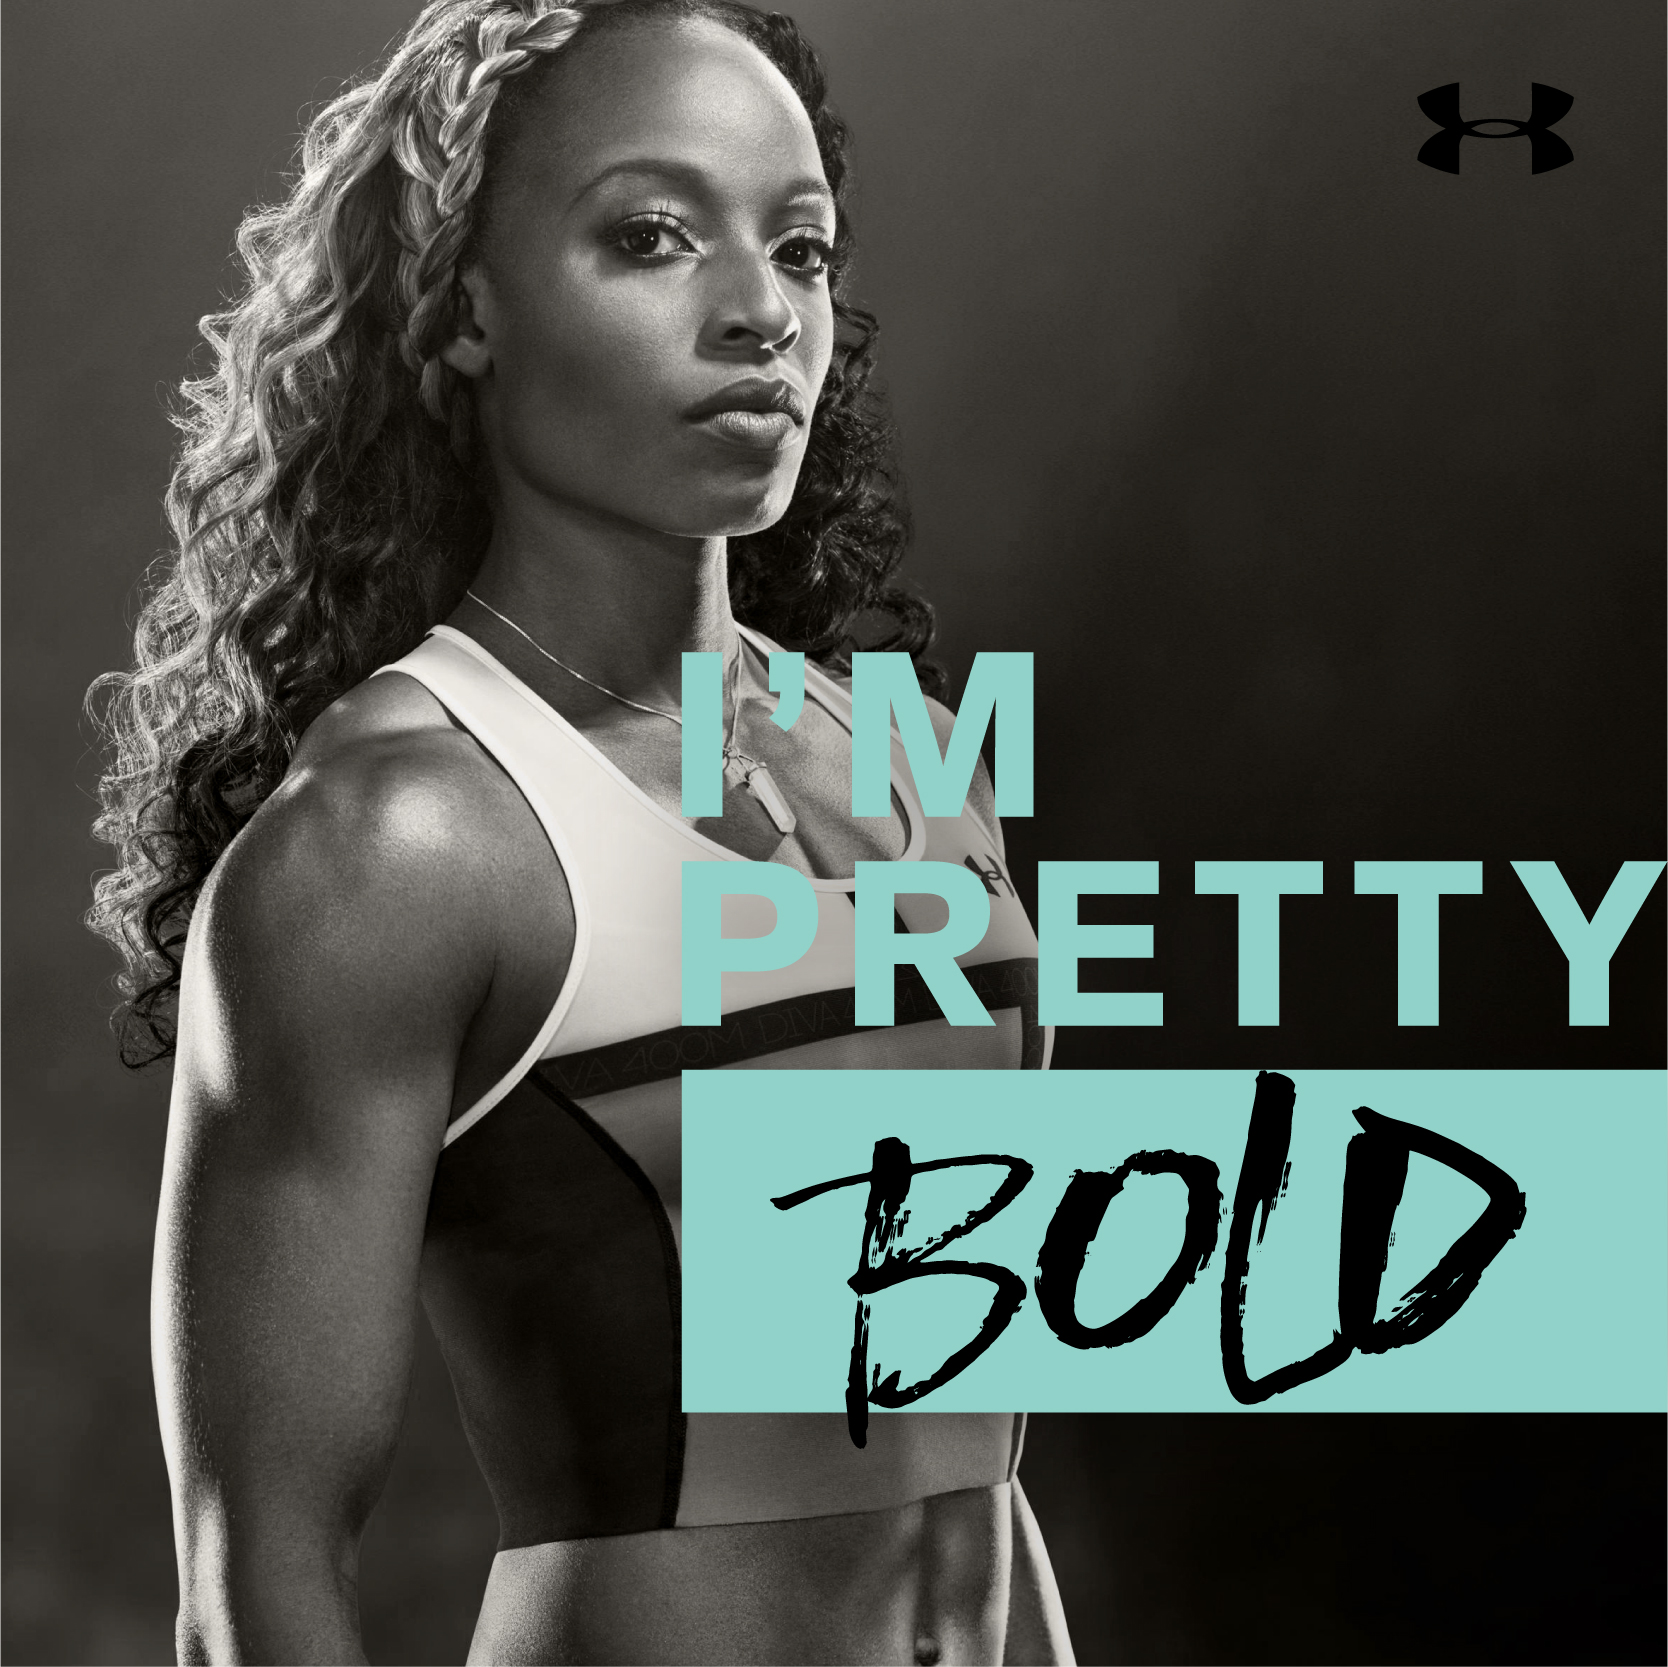 Under Armour's New Campaign Is All About The Power Of Female